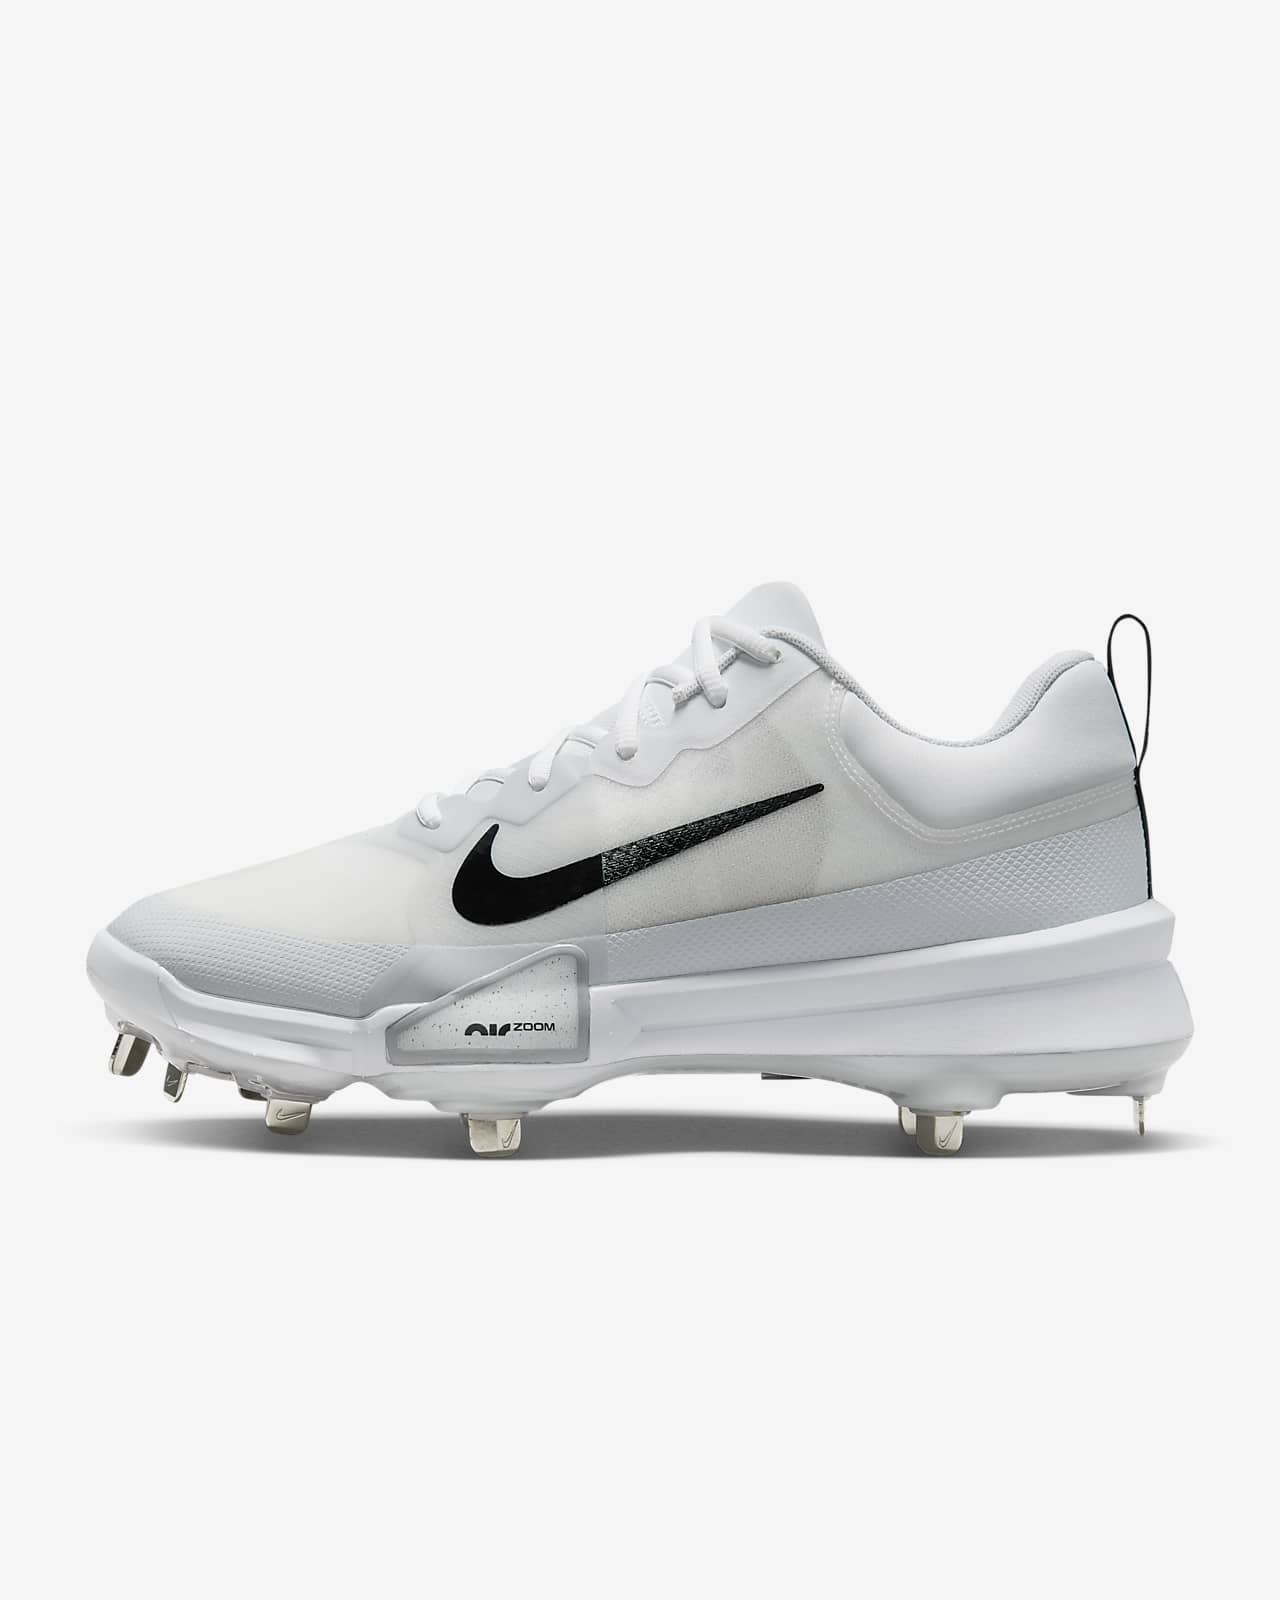 Nike Force Zoom Trout 7 Men's Metal Baseball Cleats in Size 10.5